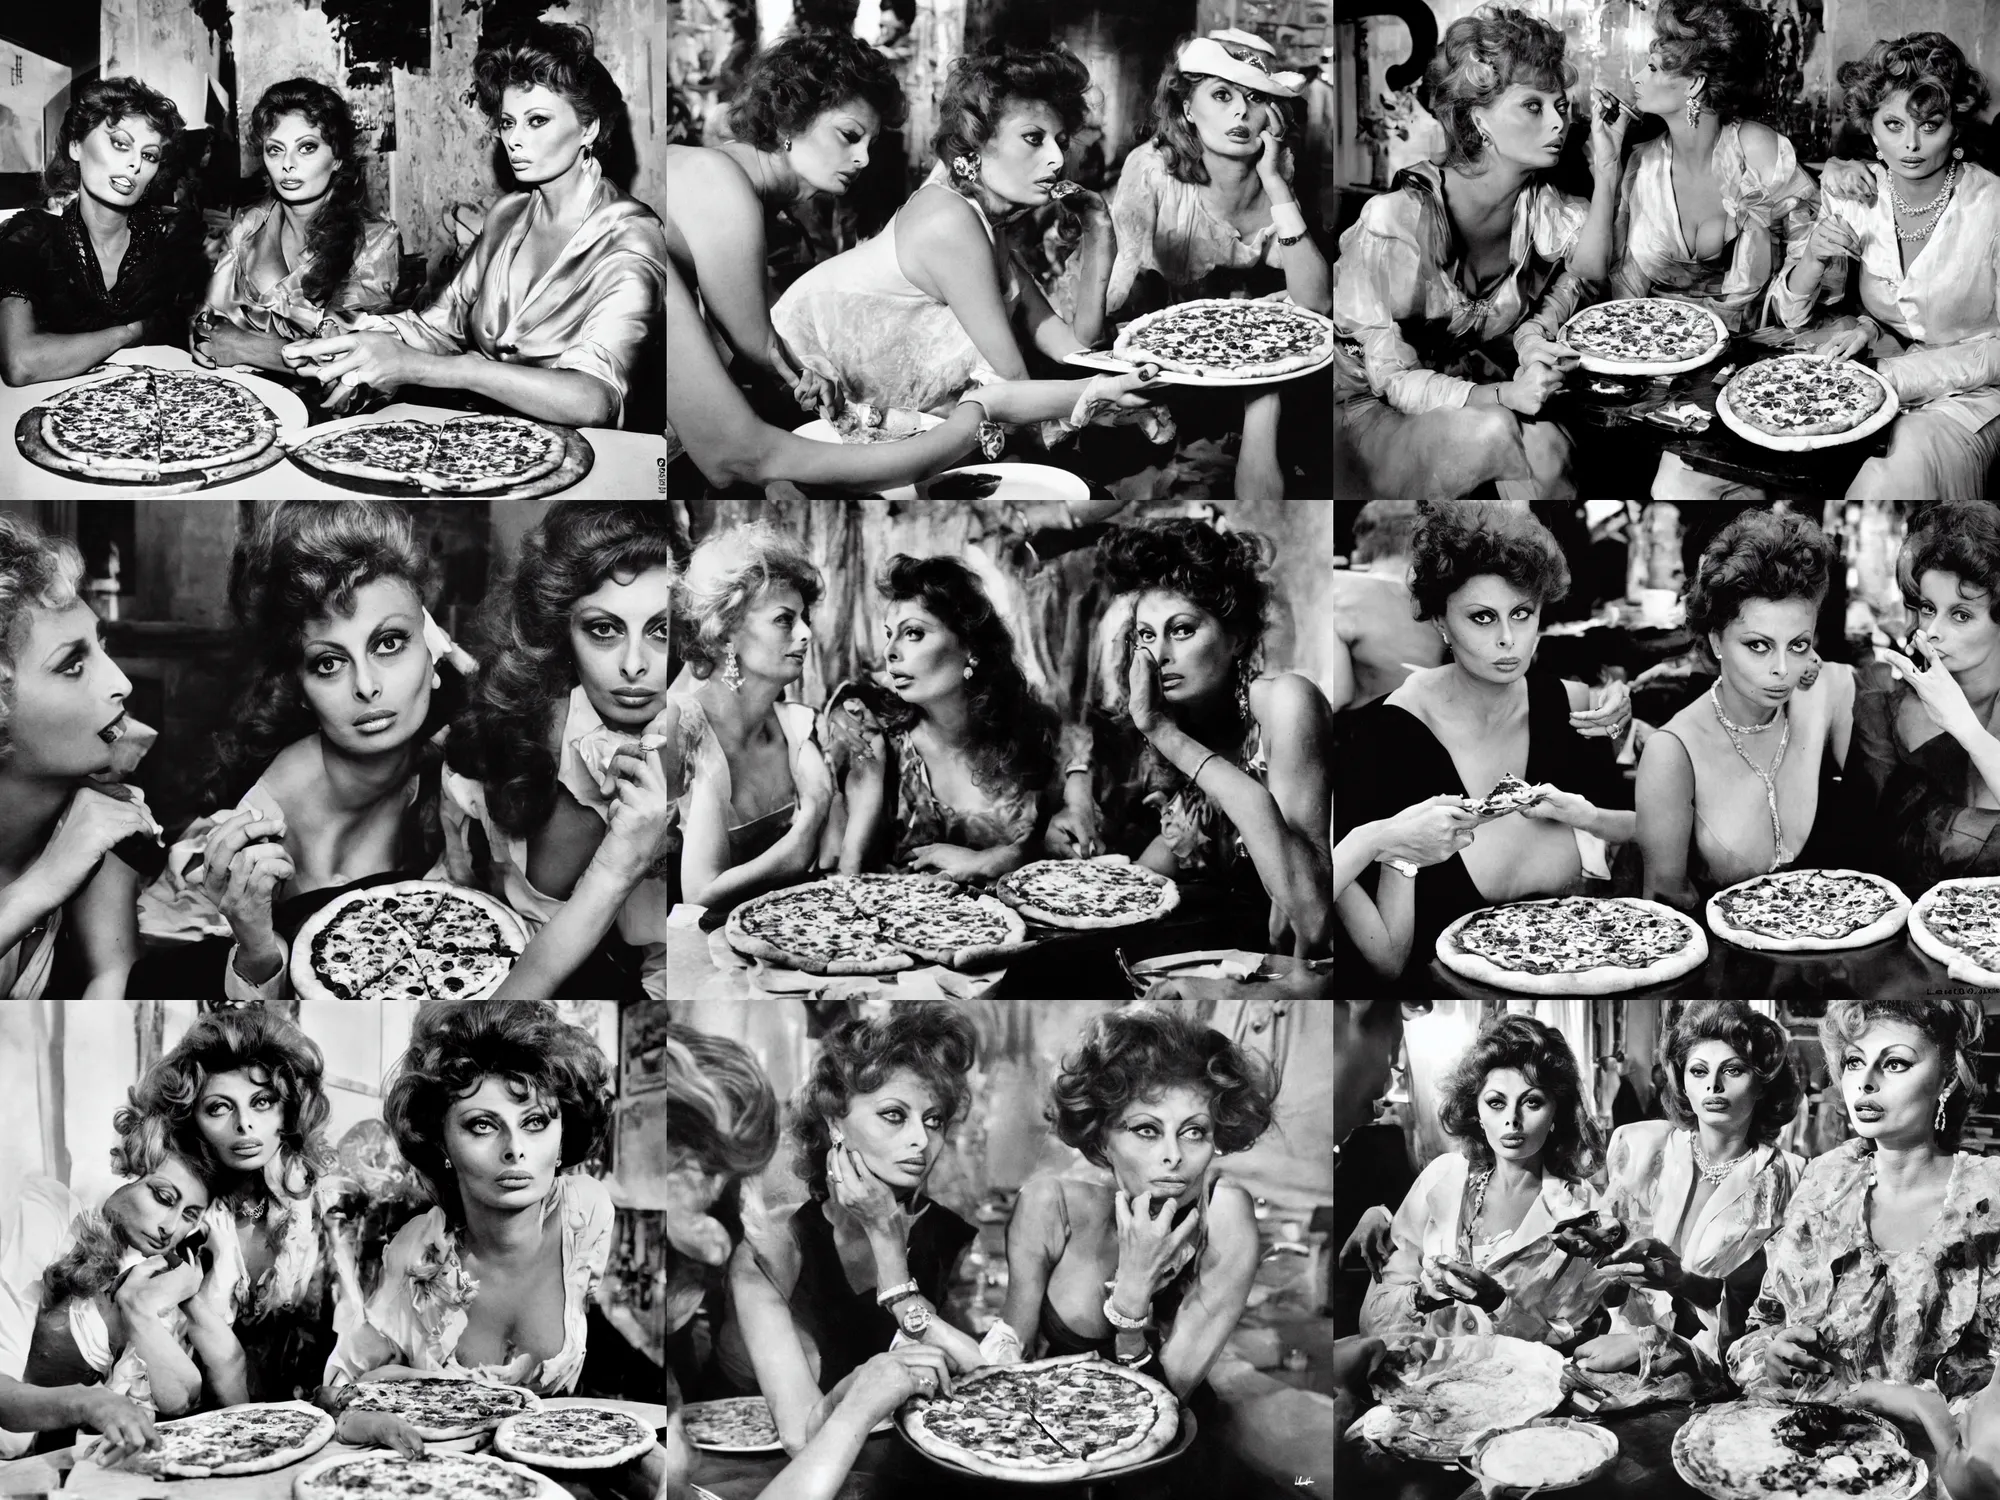 Prompt: sharing a pizza margherita, poor young sophia loren vs royal queen margherita of savoy, contrasting lives, beautiful, stunning, smooth lighting, exquisit detail, masterpiece, timeless, historical photo by letizia battaglia